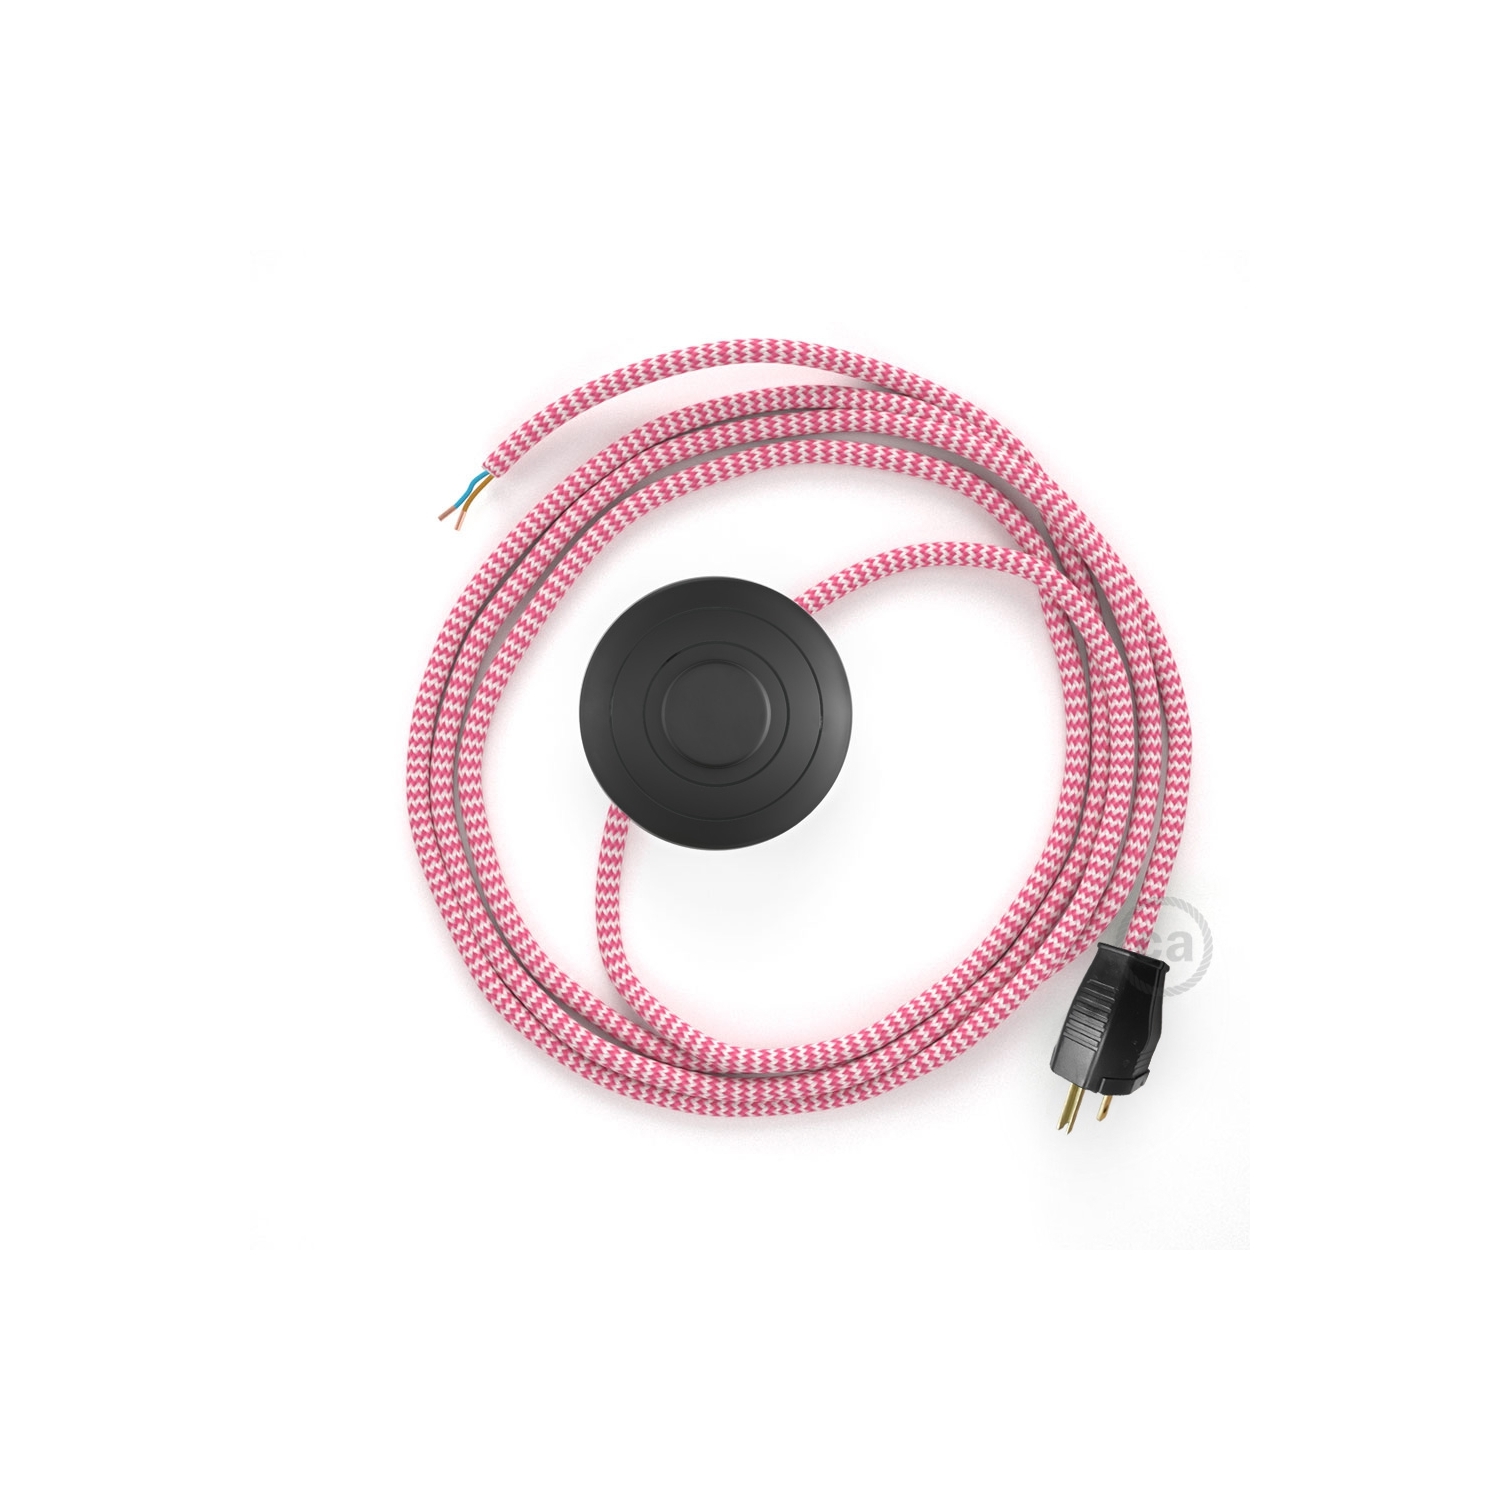 Power Cord with foot switch, RZ08 Fuchsia & White Chevron - Choose color of switch/plug